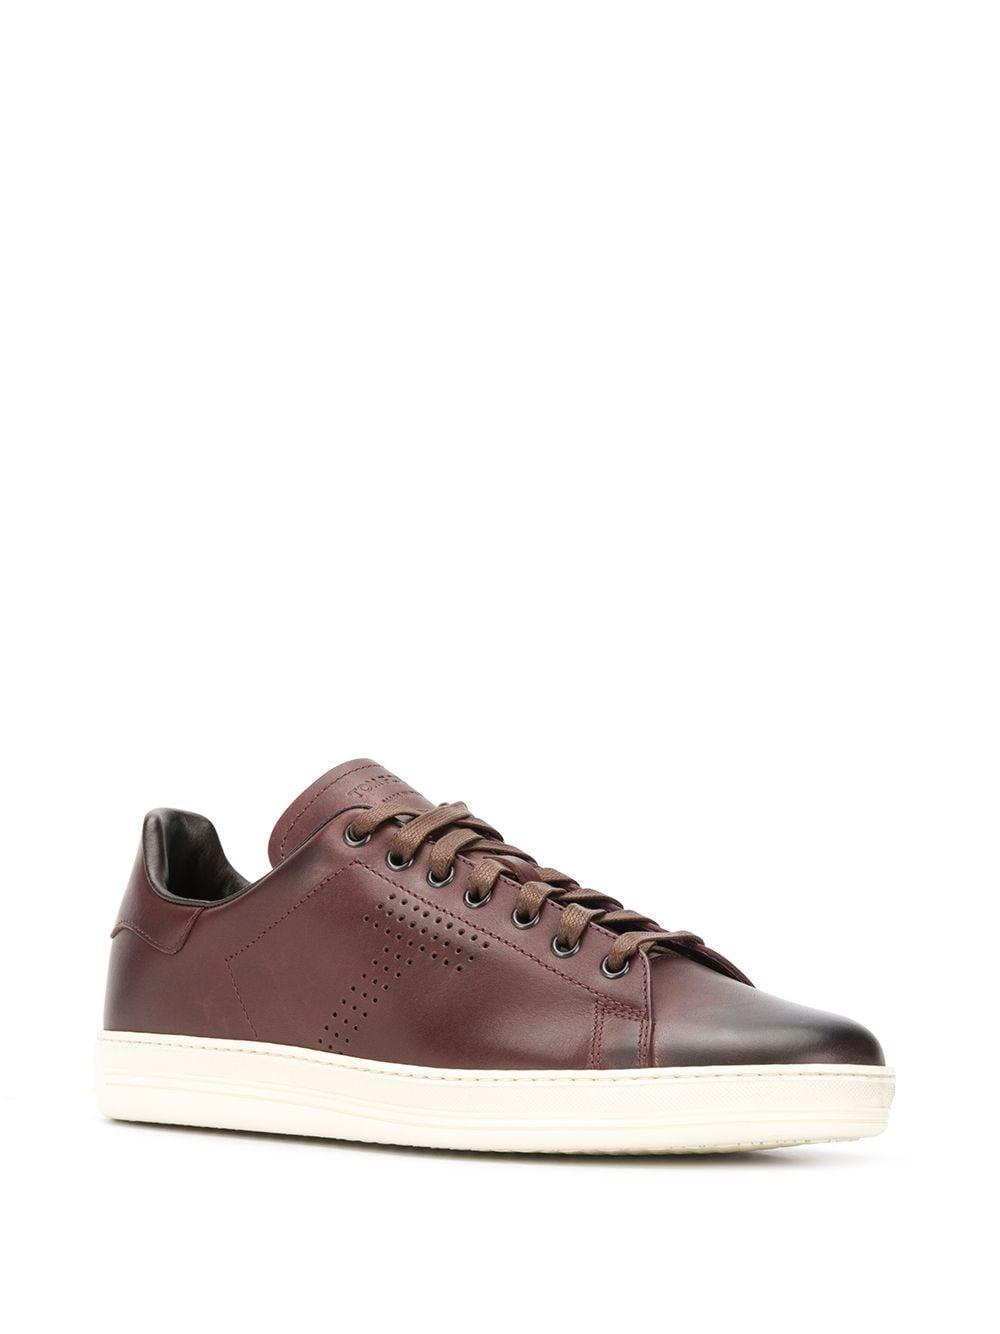 Tom Ford Worn-effect Sneakers in Brown for Men - Lyst